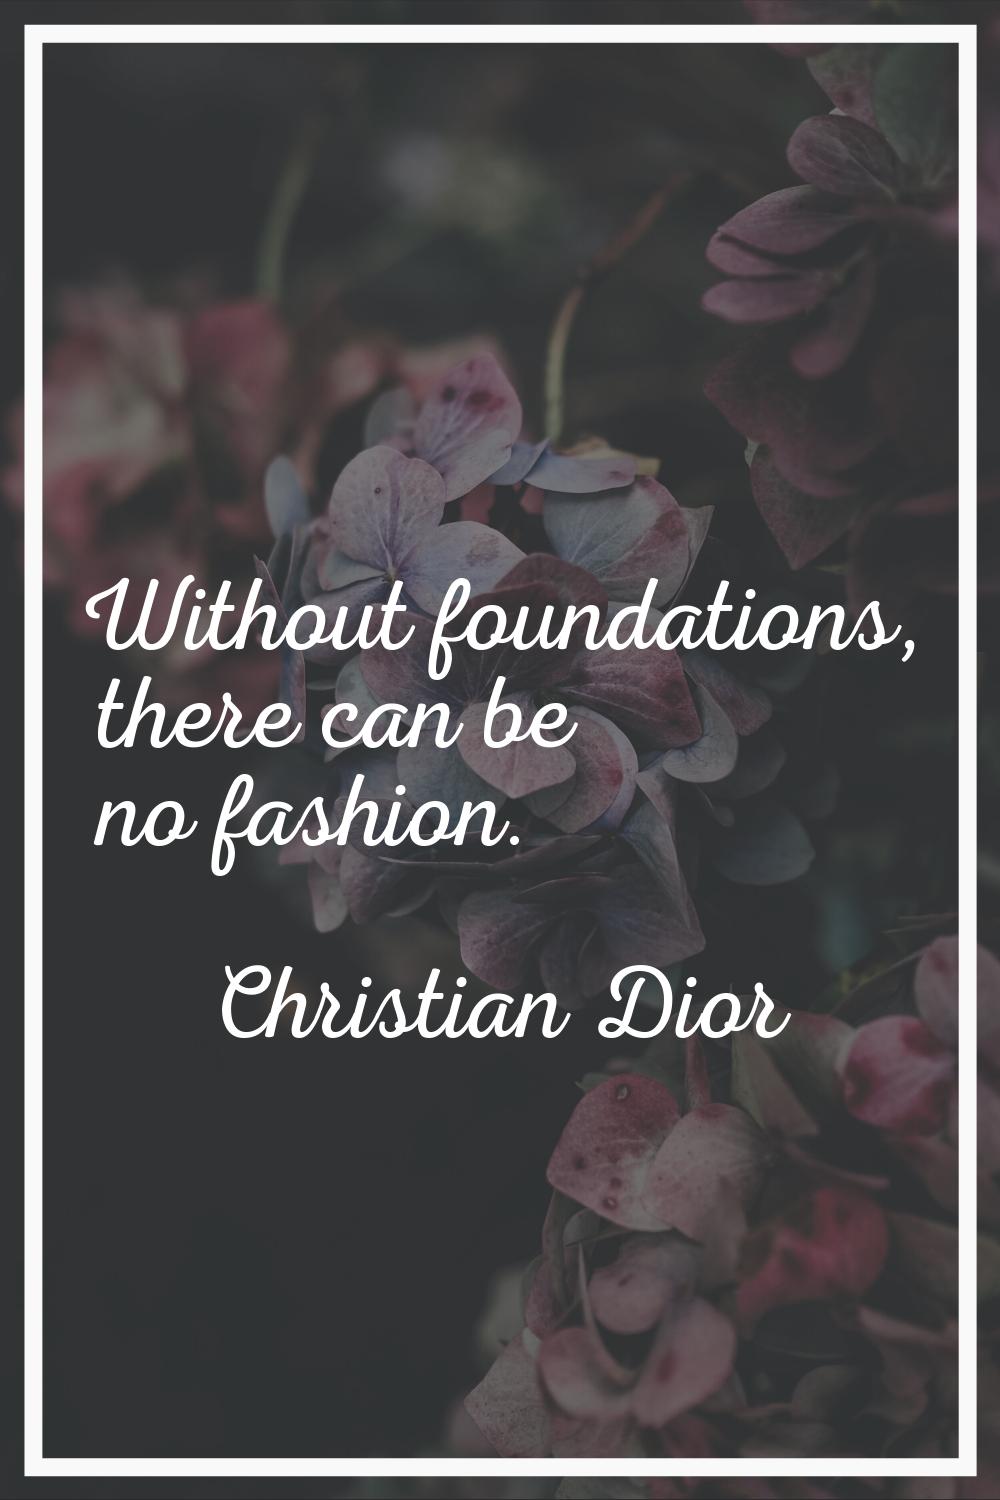 Without foundations, there can be no fashion.